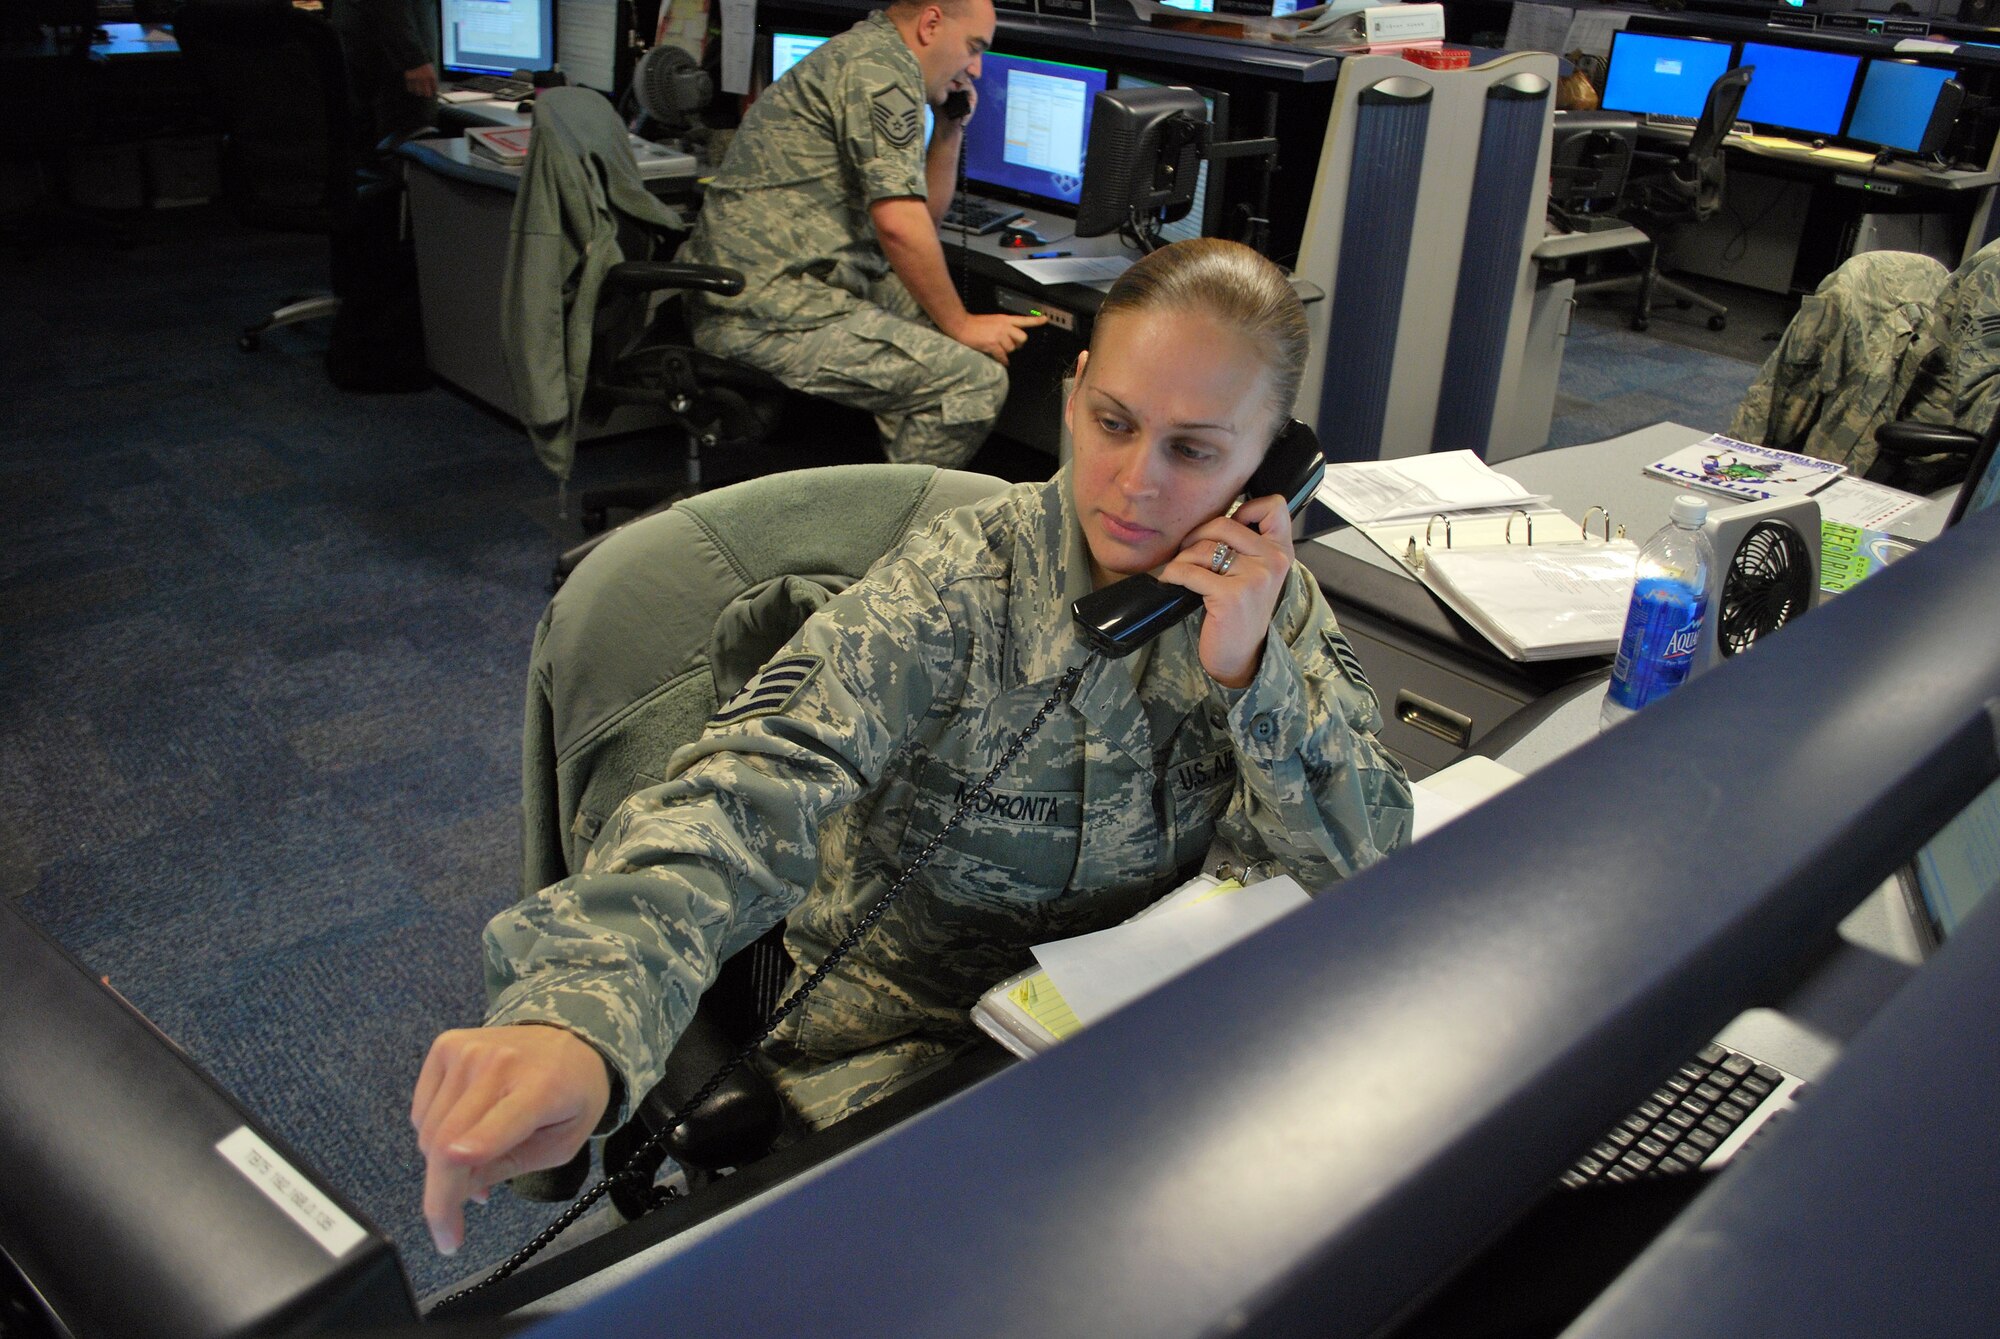 Then-Staff Sgt. Crystal Moronta, a command post controller for the 618th Air and Space Operations Center, coordinates an Air Mobility Command airlift mission from the 618th AOC's operations floor at Scott AFB, Ill., in this file photo.  Sergeant Moronta was promoted to technical sergeant on Dec. 4, by Brig. Gen. Sam Cox, the 618th AOC commander, under the Stripes for Exceptional Performers program.  (U.S. Air Force photo/Capt. Justin Brockhoff)